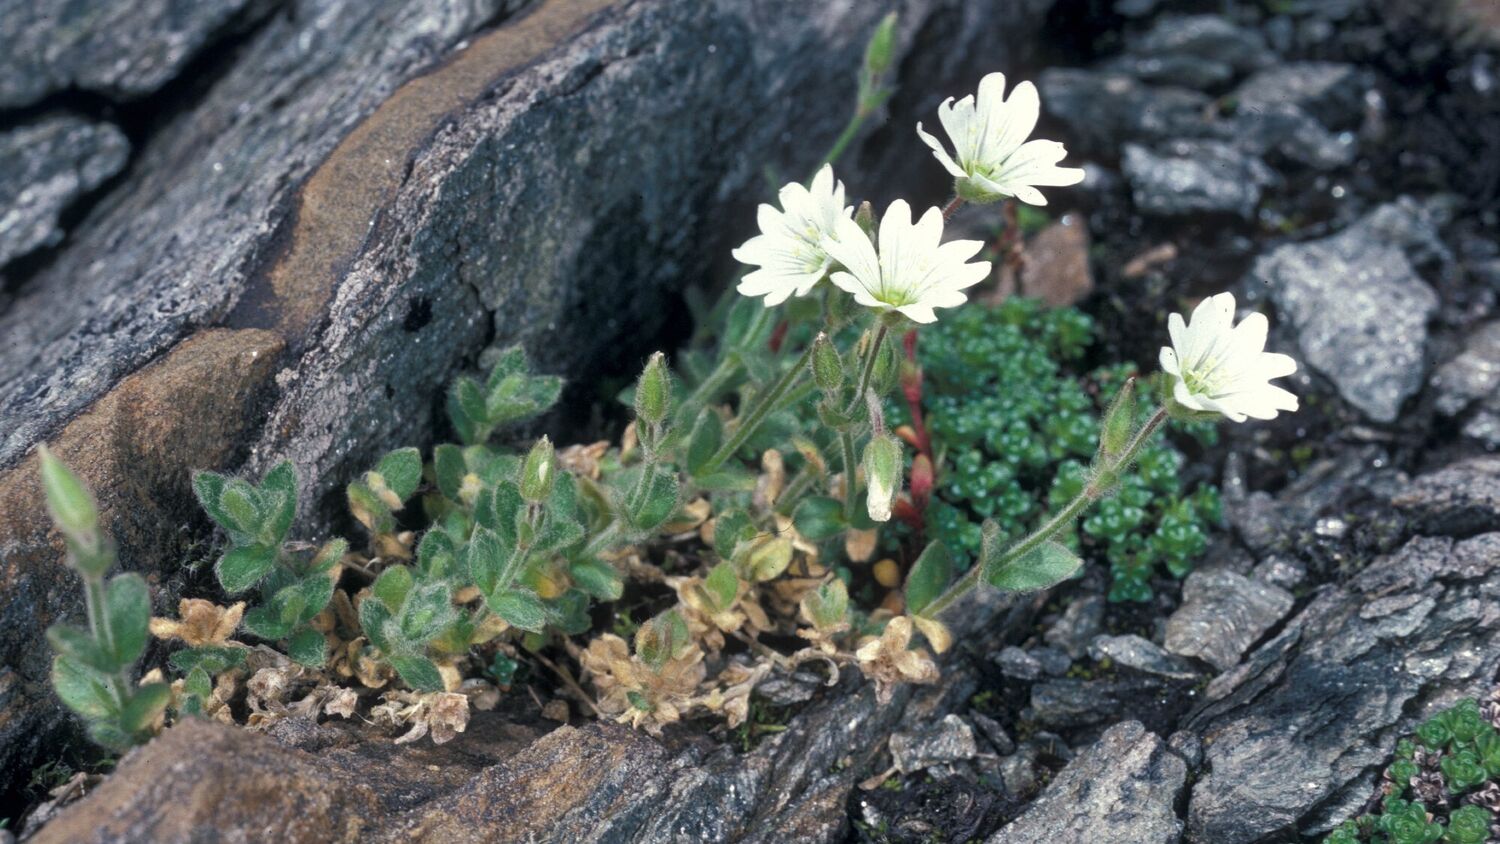 A small white-flowered alpine plant growing in a rocky place.